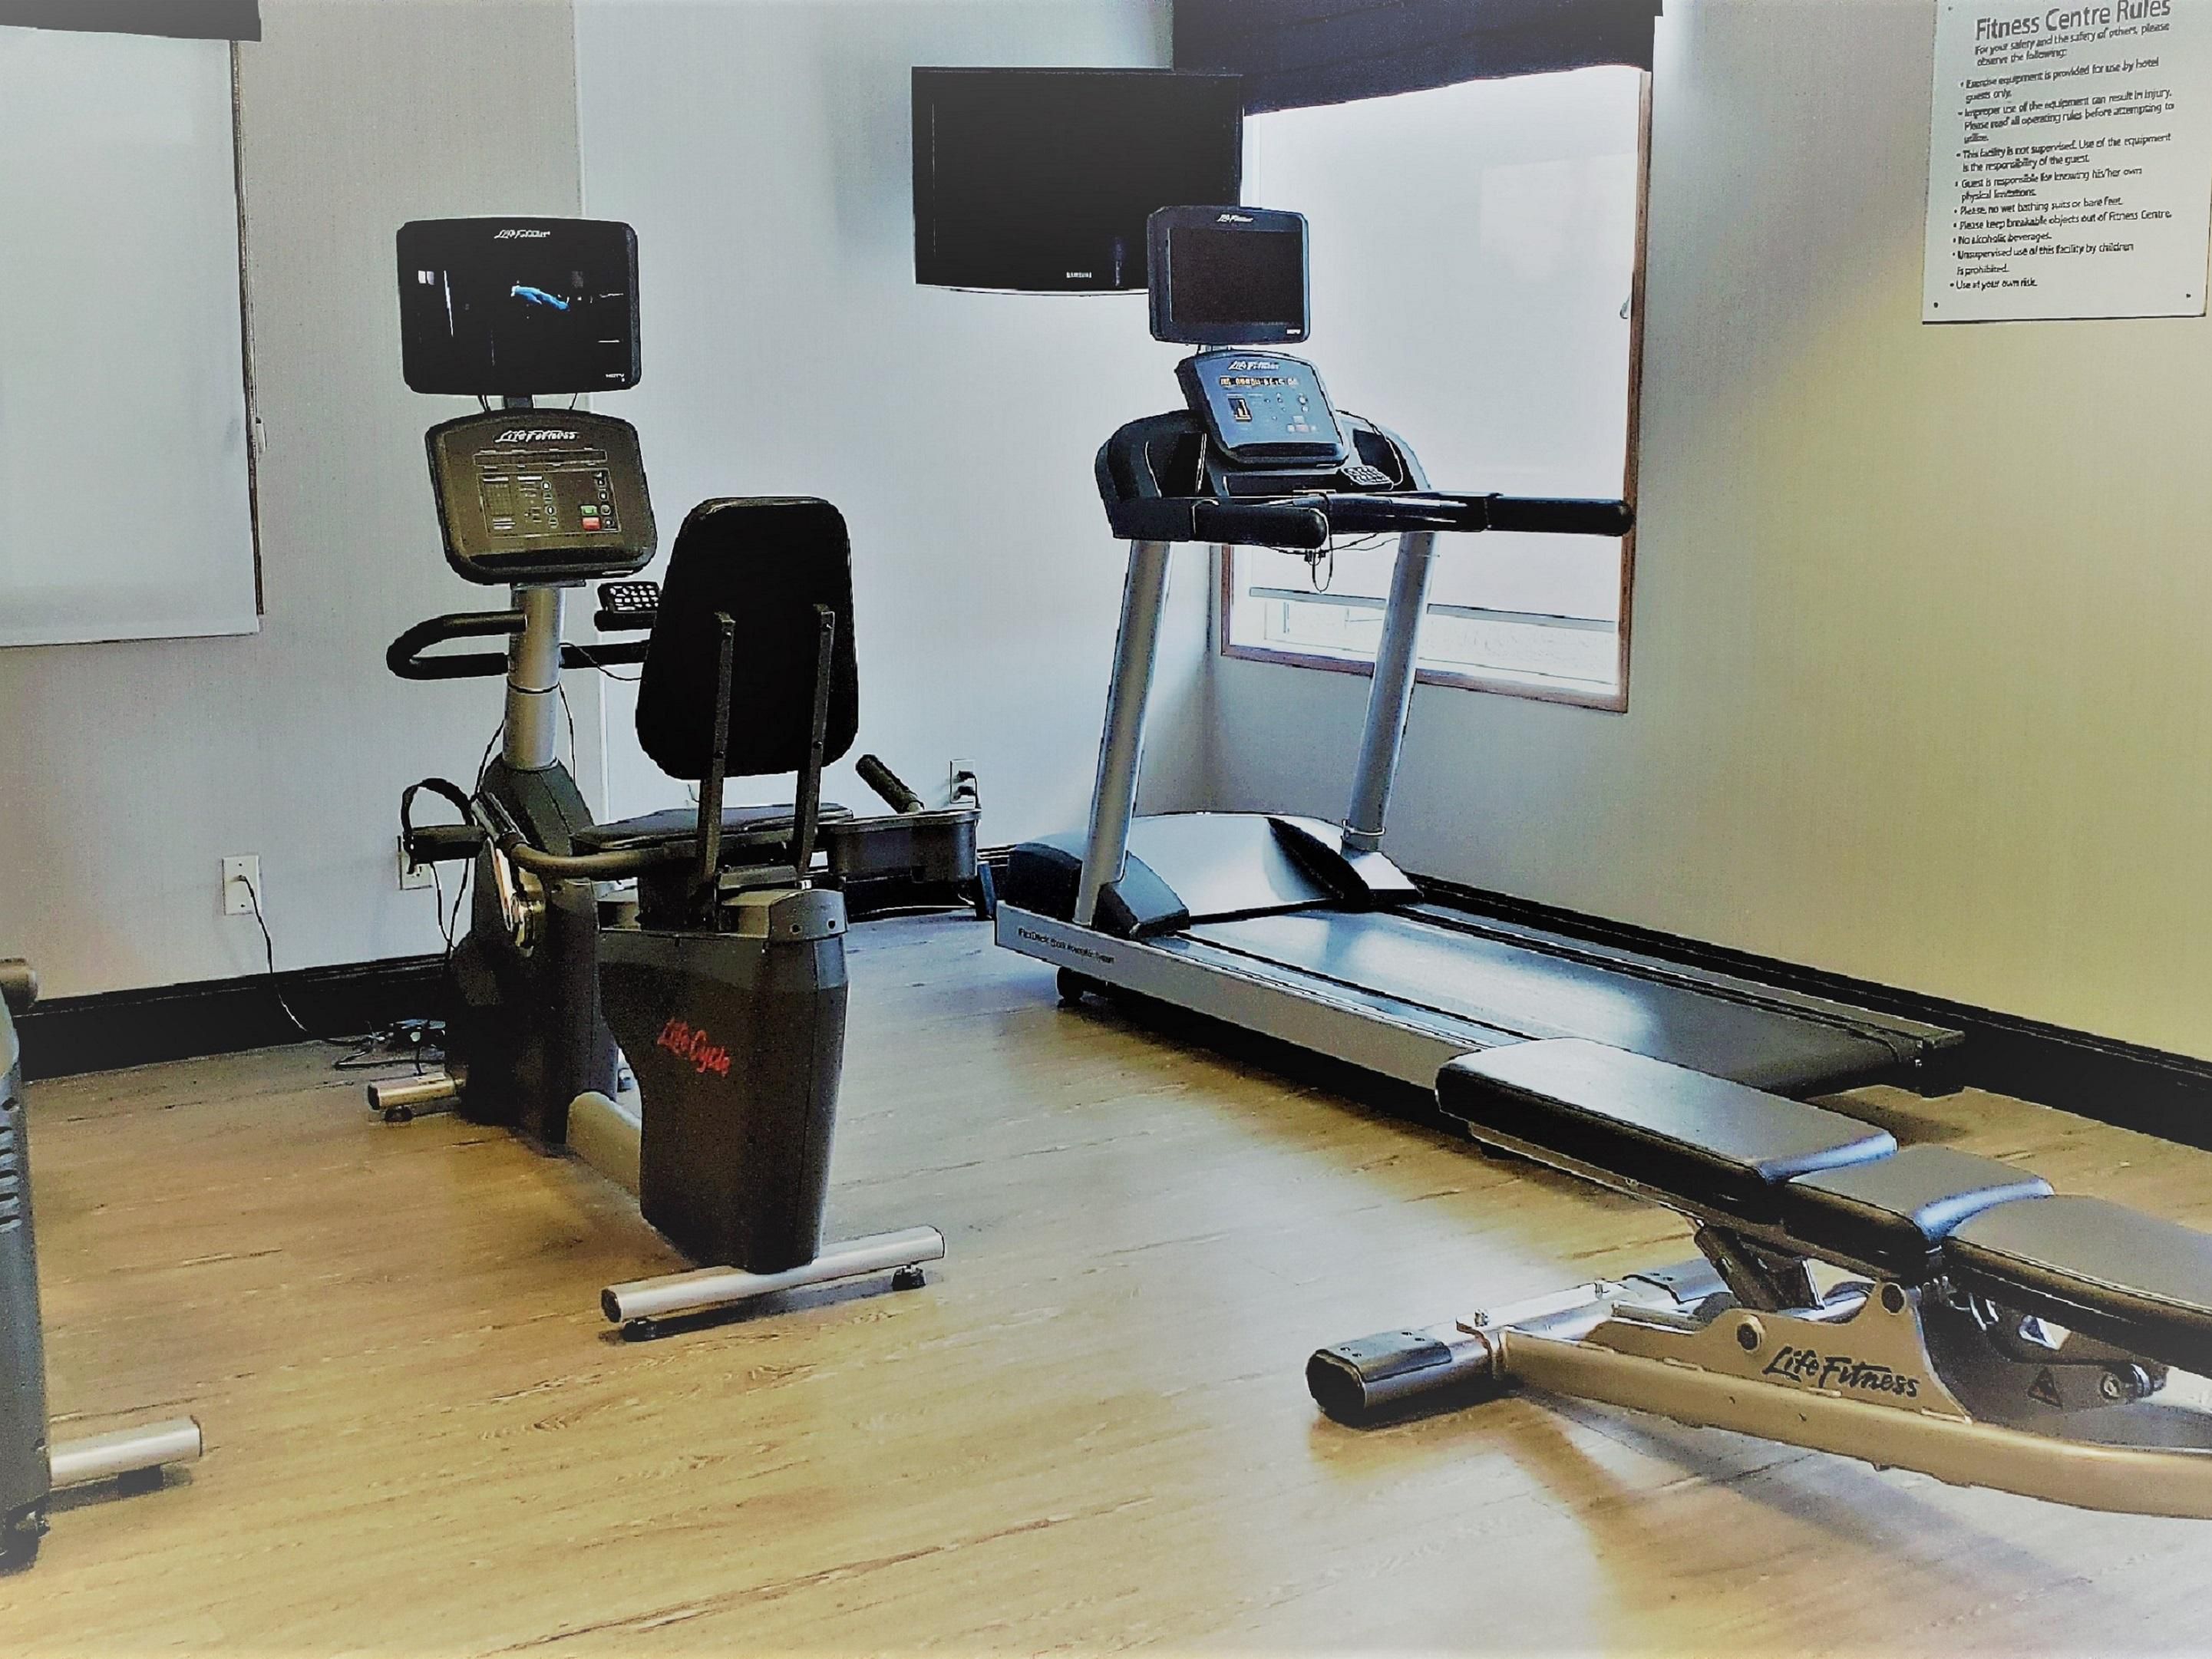 Start your day off feeling your best by using our new fitness center equipments. Hand weights, yoga mats, and medicine balls are available in our workout area.